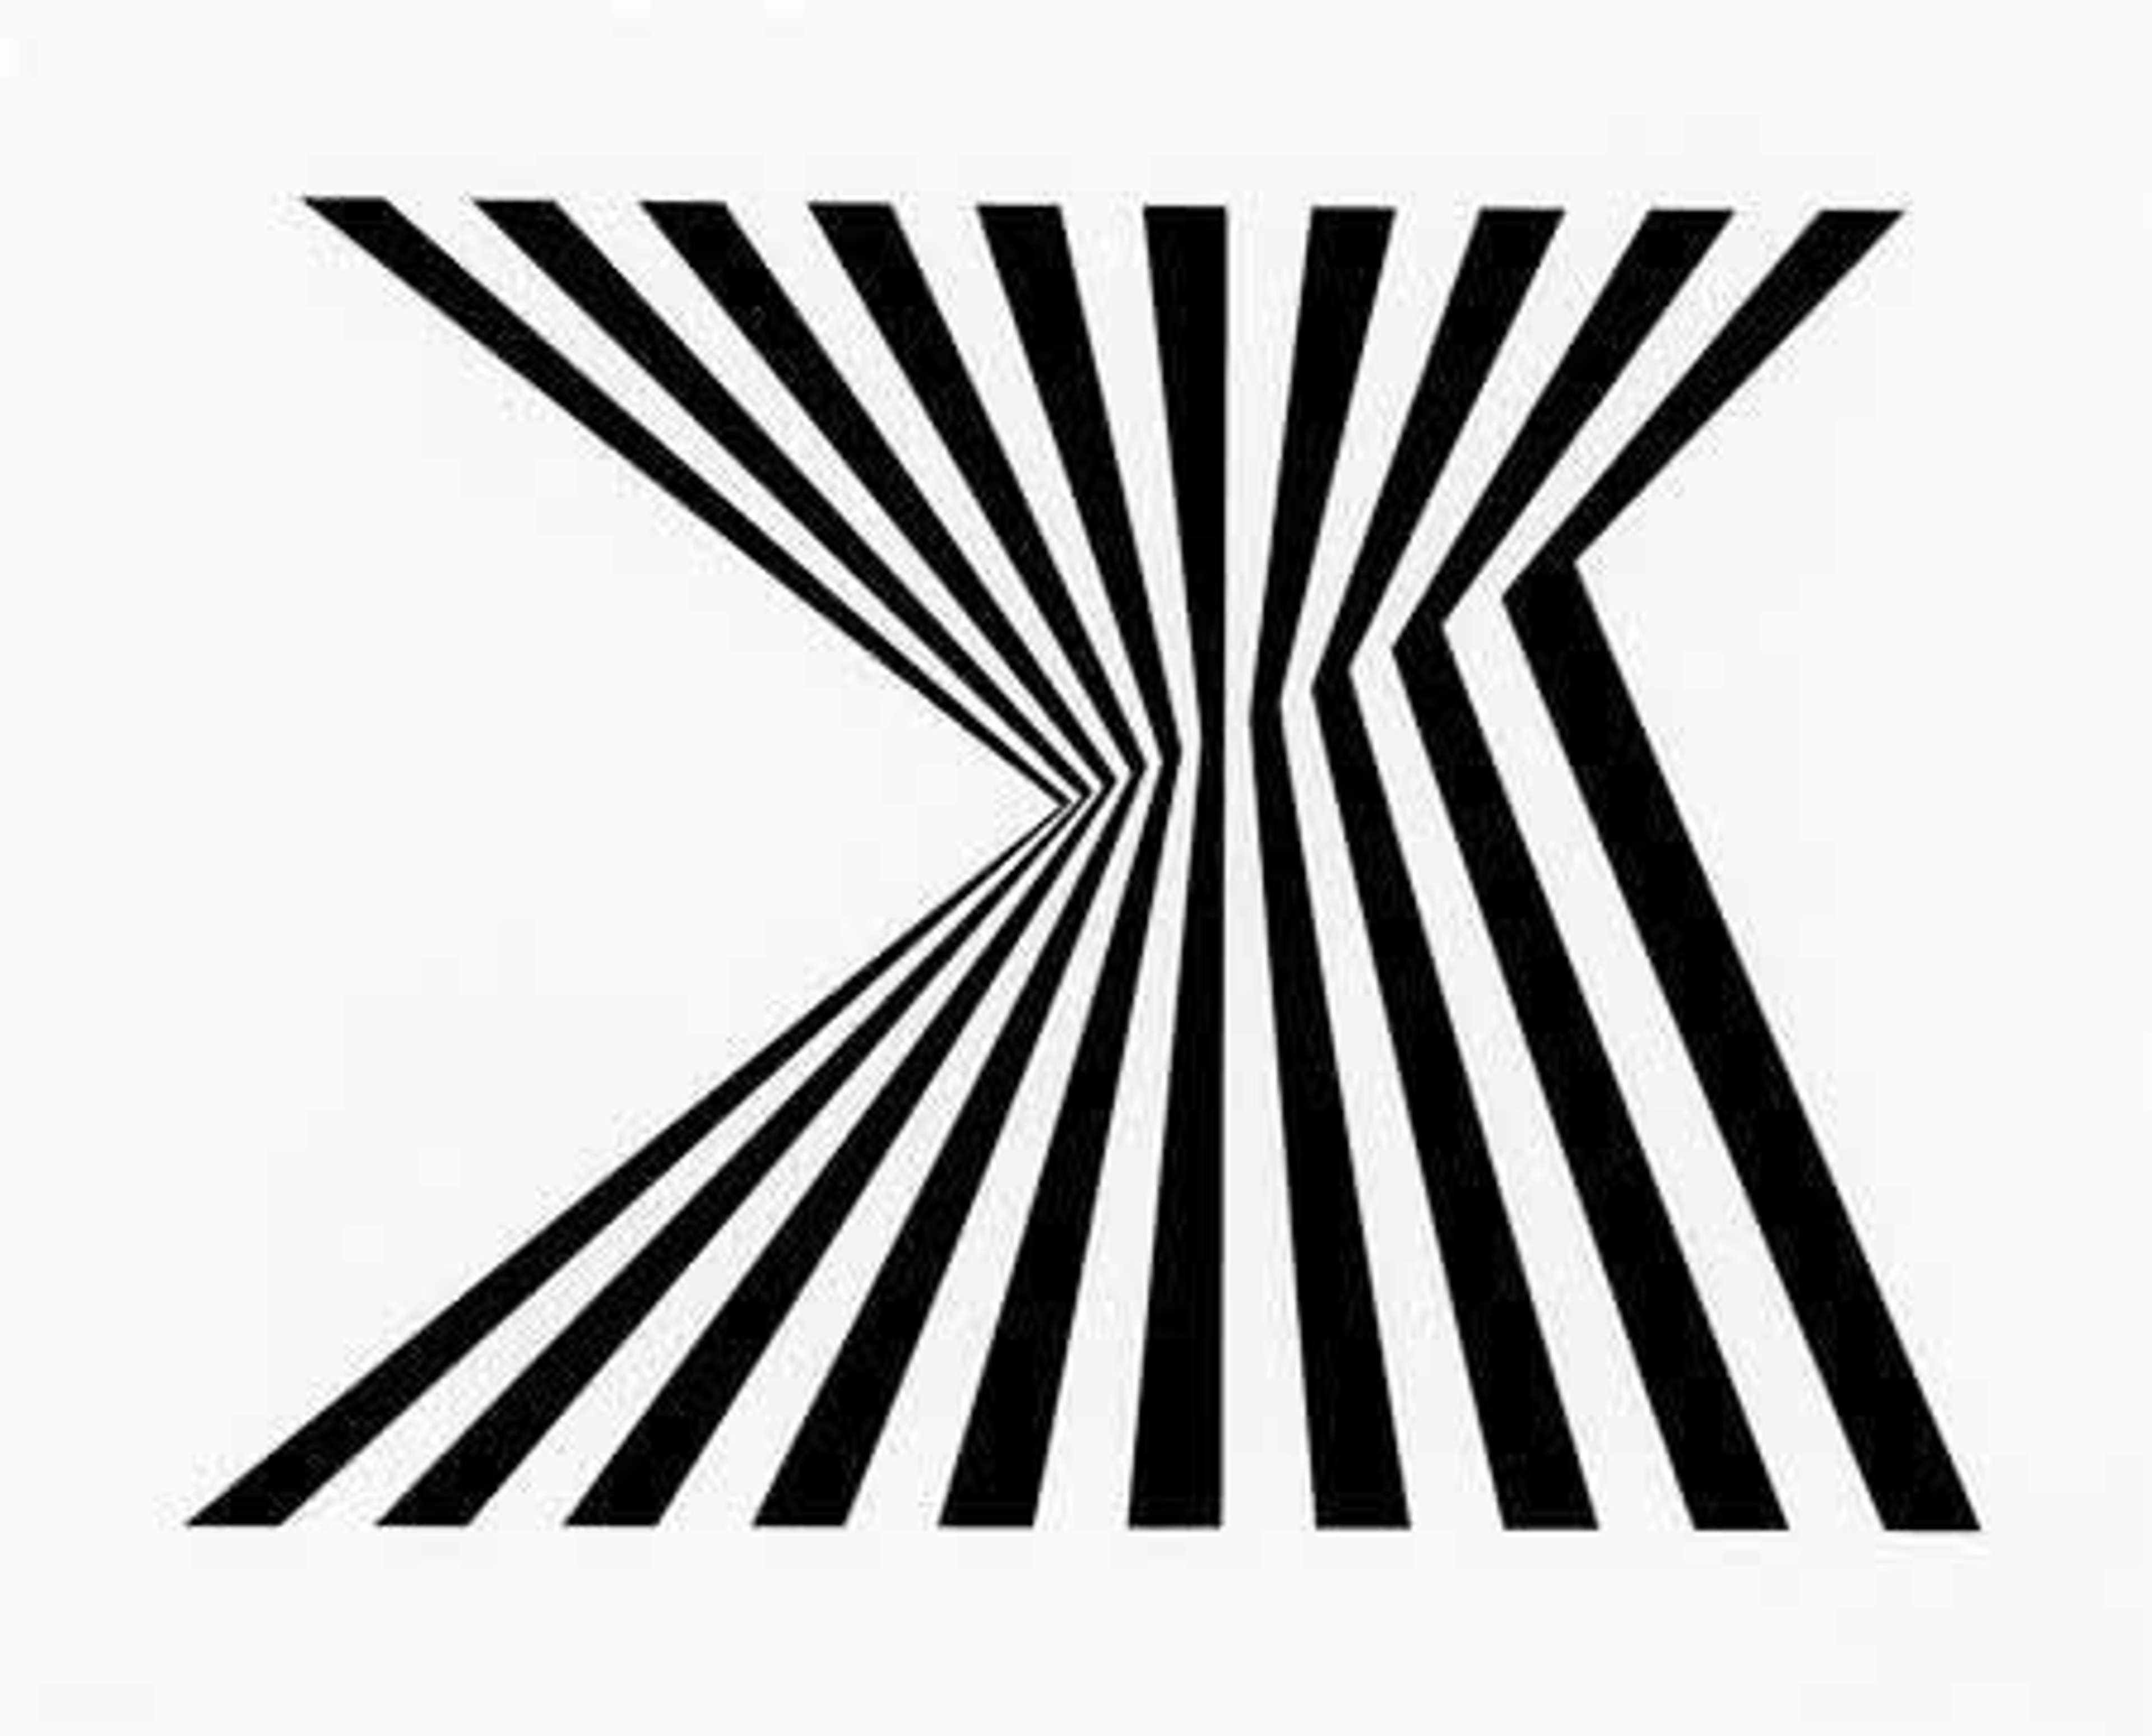 Bridget Riley’s Fragment 1. Vertical black lines with indentions of white space, depicting an optical illusion